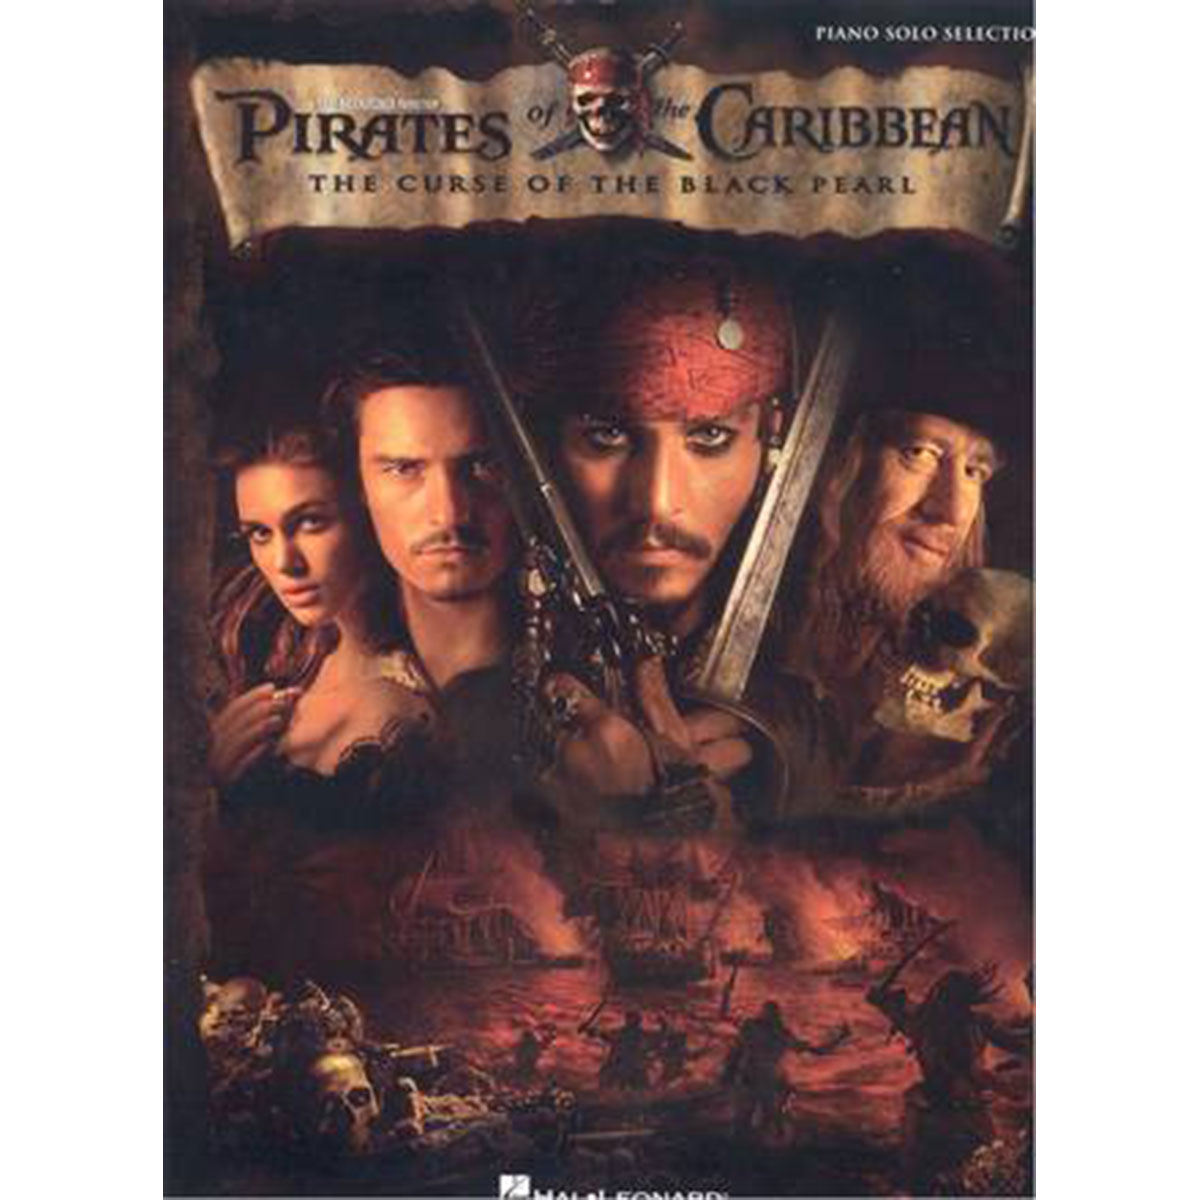 Pirates of the Caribbean The curse of the black pearl